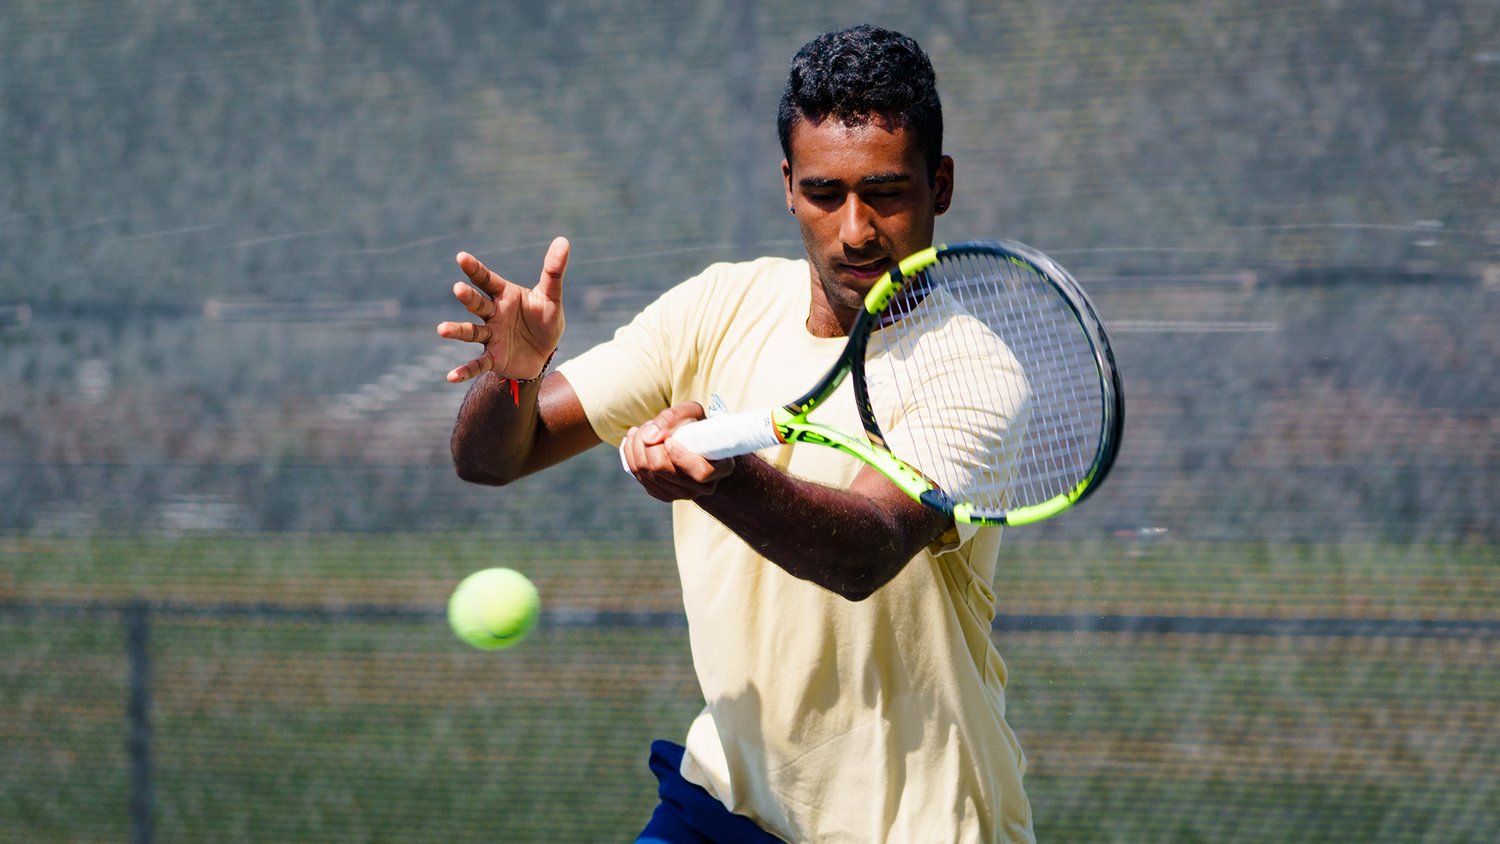 Anish Sriniketh twice won Class 6A’s Region 3 Tournament for the Tompkins Falcons and made two trips to the state championships, emerging as the state’s top boys’ singles player his senior year. Next season he will suit up for the Texas A&M Aggies, making the step up from Division II to Division I.